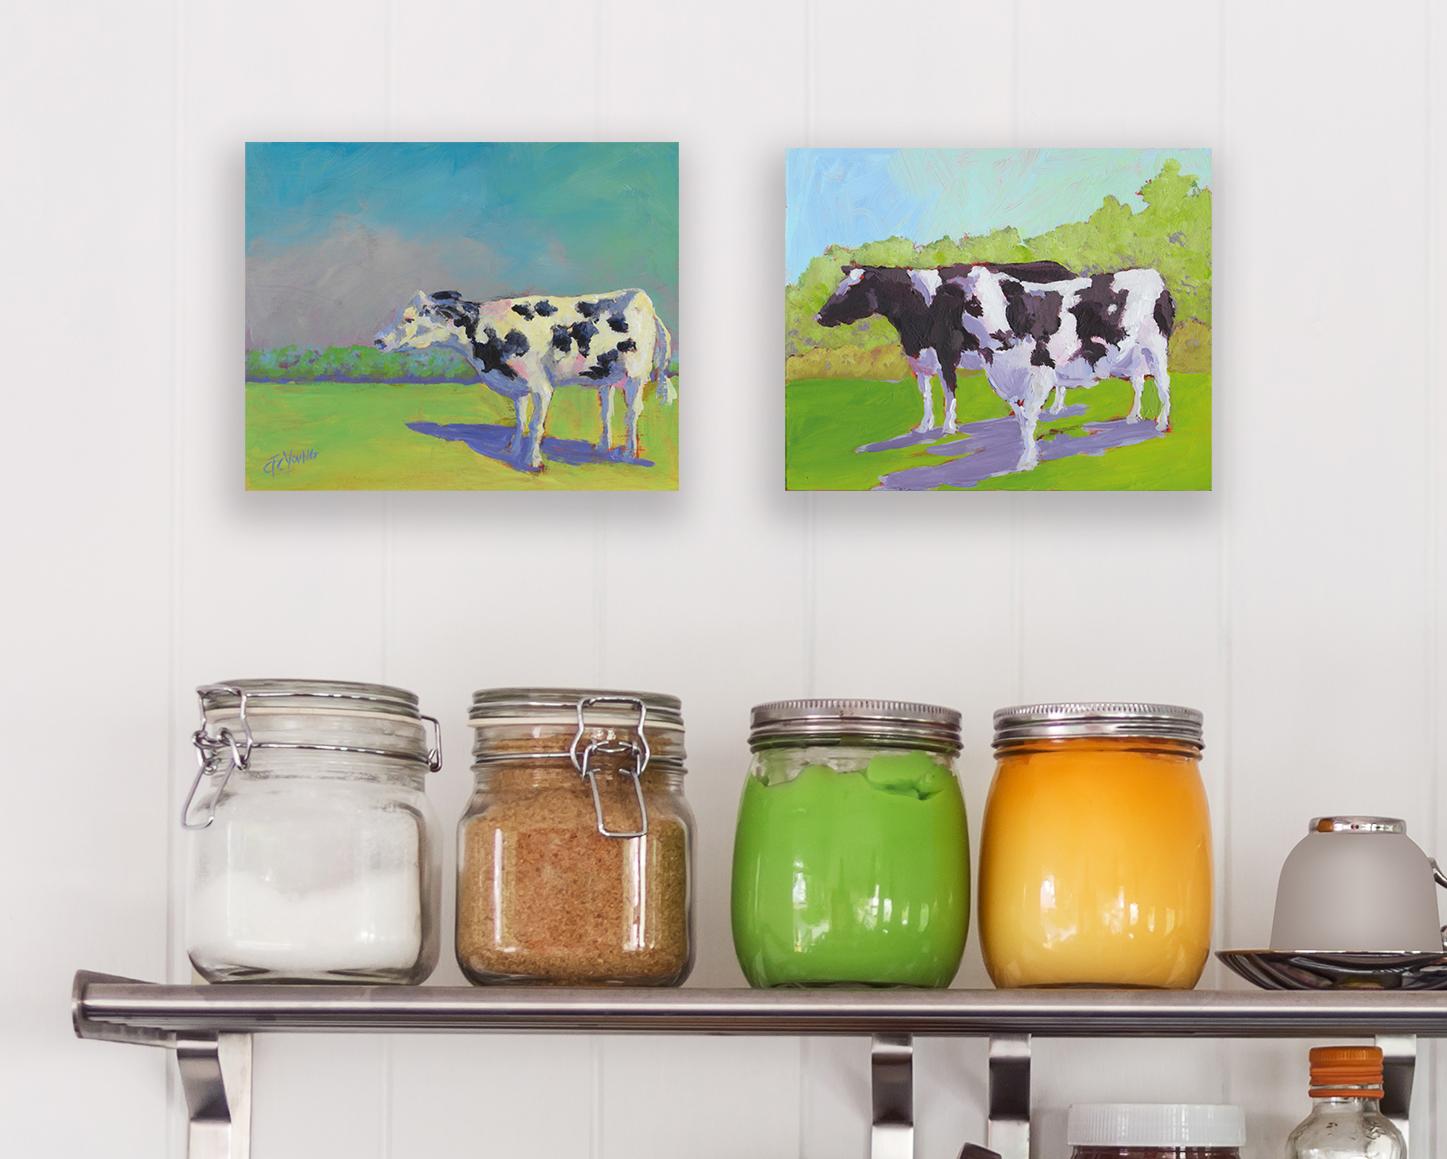 New England, Contemporary art, contemporary, cow, cows, nature, green, black, white, acrylic painting, painting on board, wood, abstract, life, natural, farm, farm life, bold, colorful, bright, interior design, interior decor

Clean, natural-looking